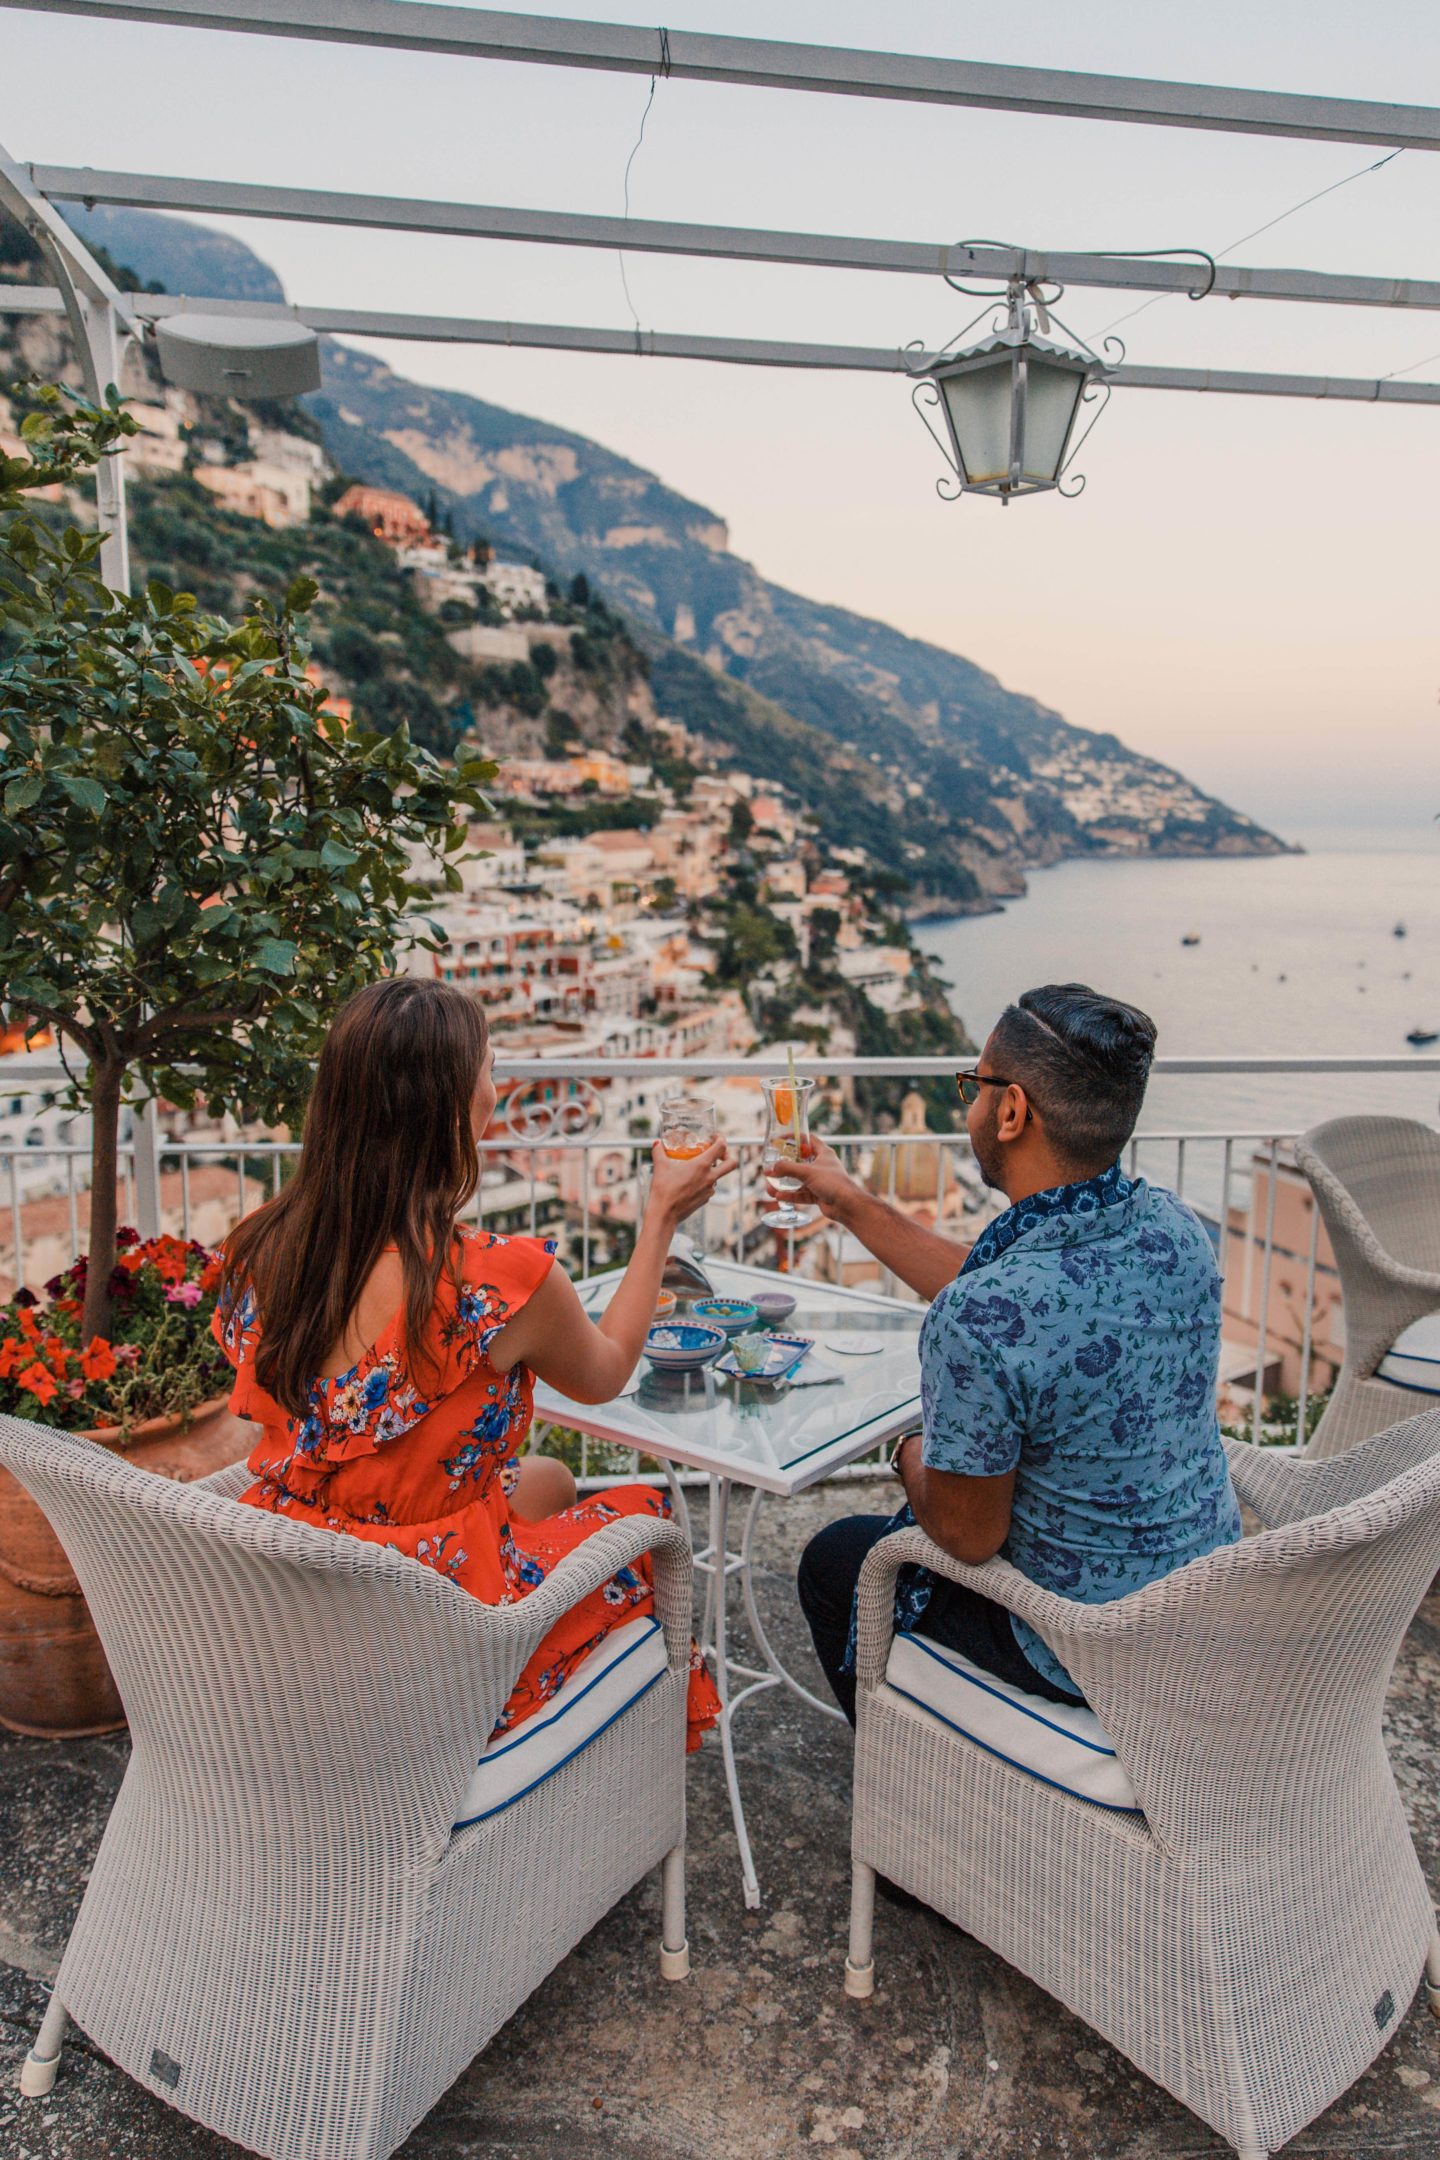 Ultimate 4 Day Positano Italy Travel Itinerary | What to See & Where to Eat: Hotel Poseidon